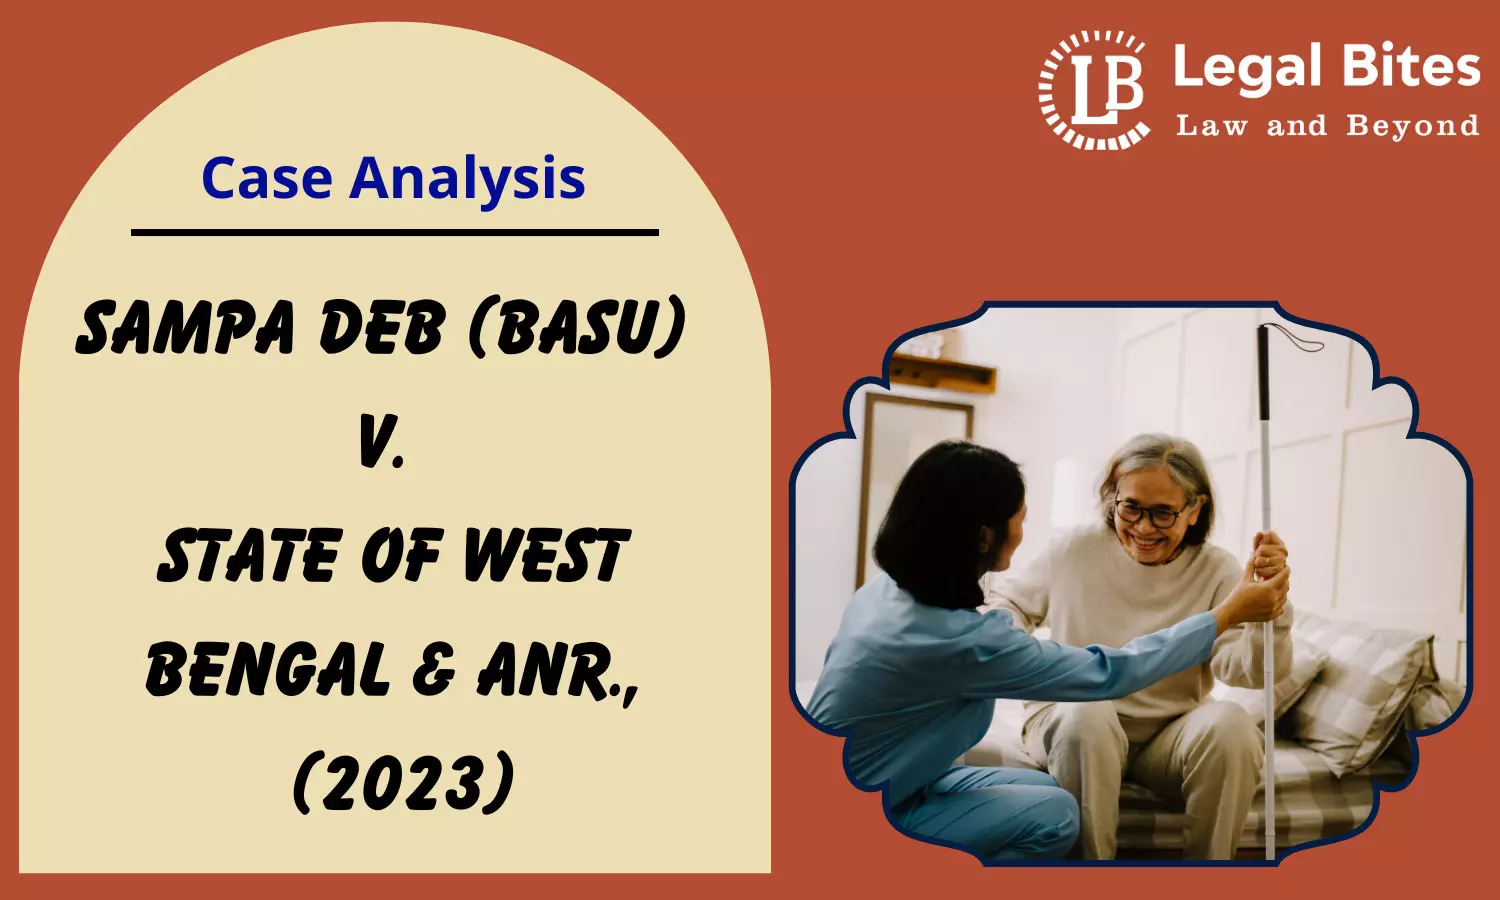 Case Analysis: Sampa Deb (Basu) v. State of West Bengal & Anr., (2023) | Nothing can Prevent a Child from Taking Care of their Parents